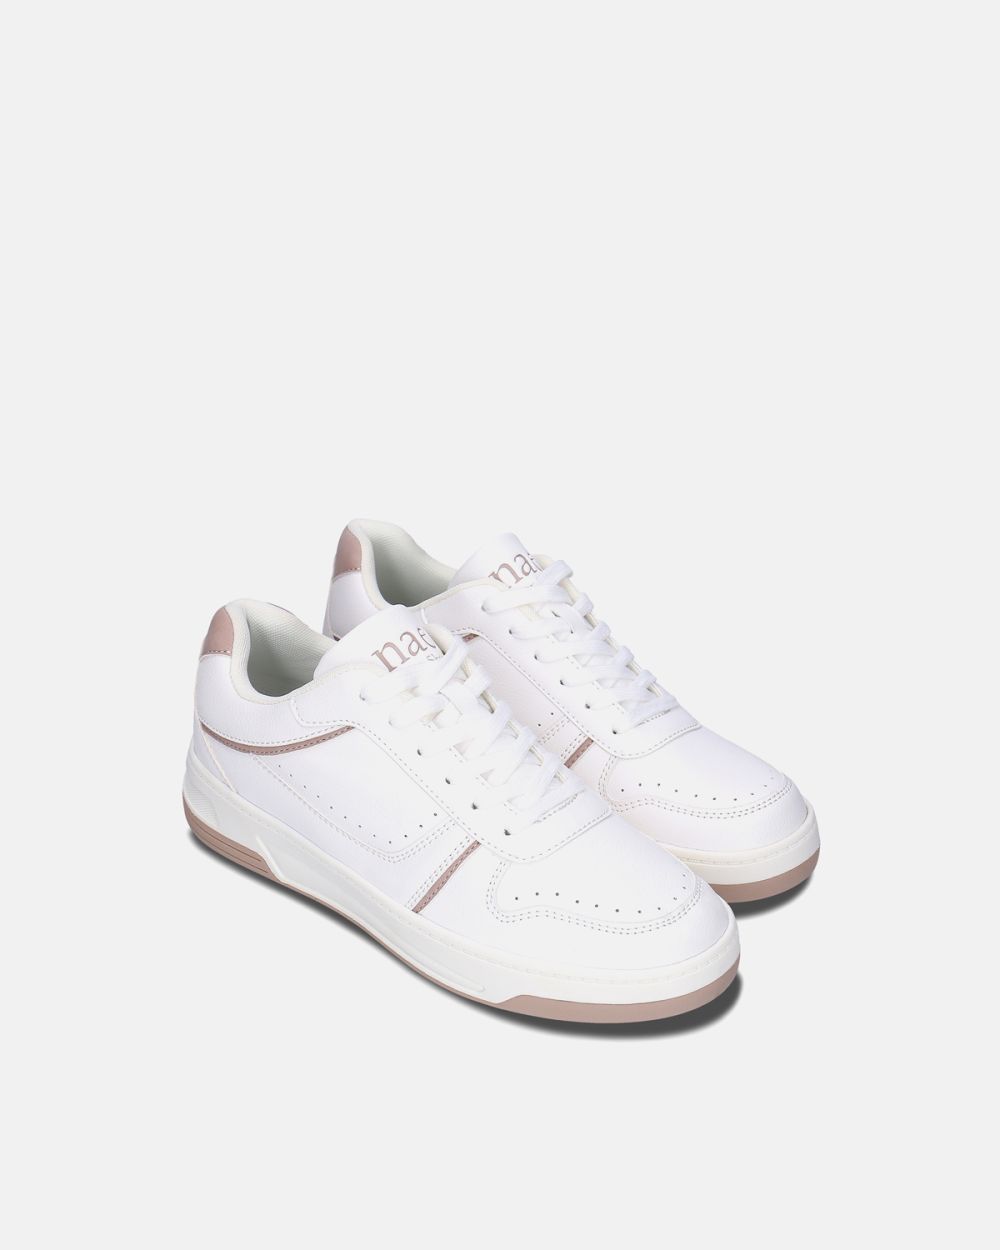 Dara White lace-up basic sport sneakers